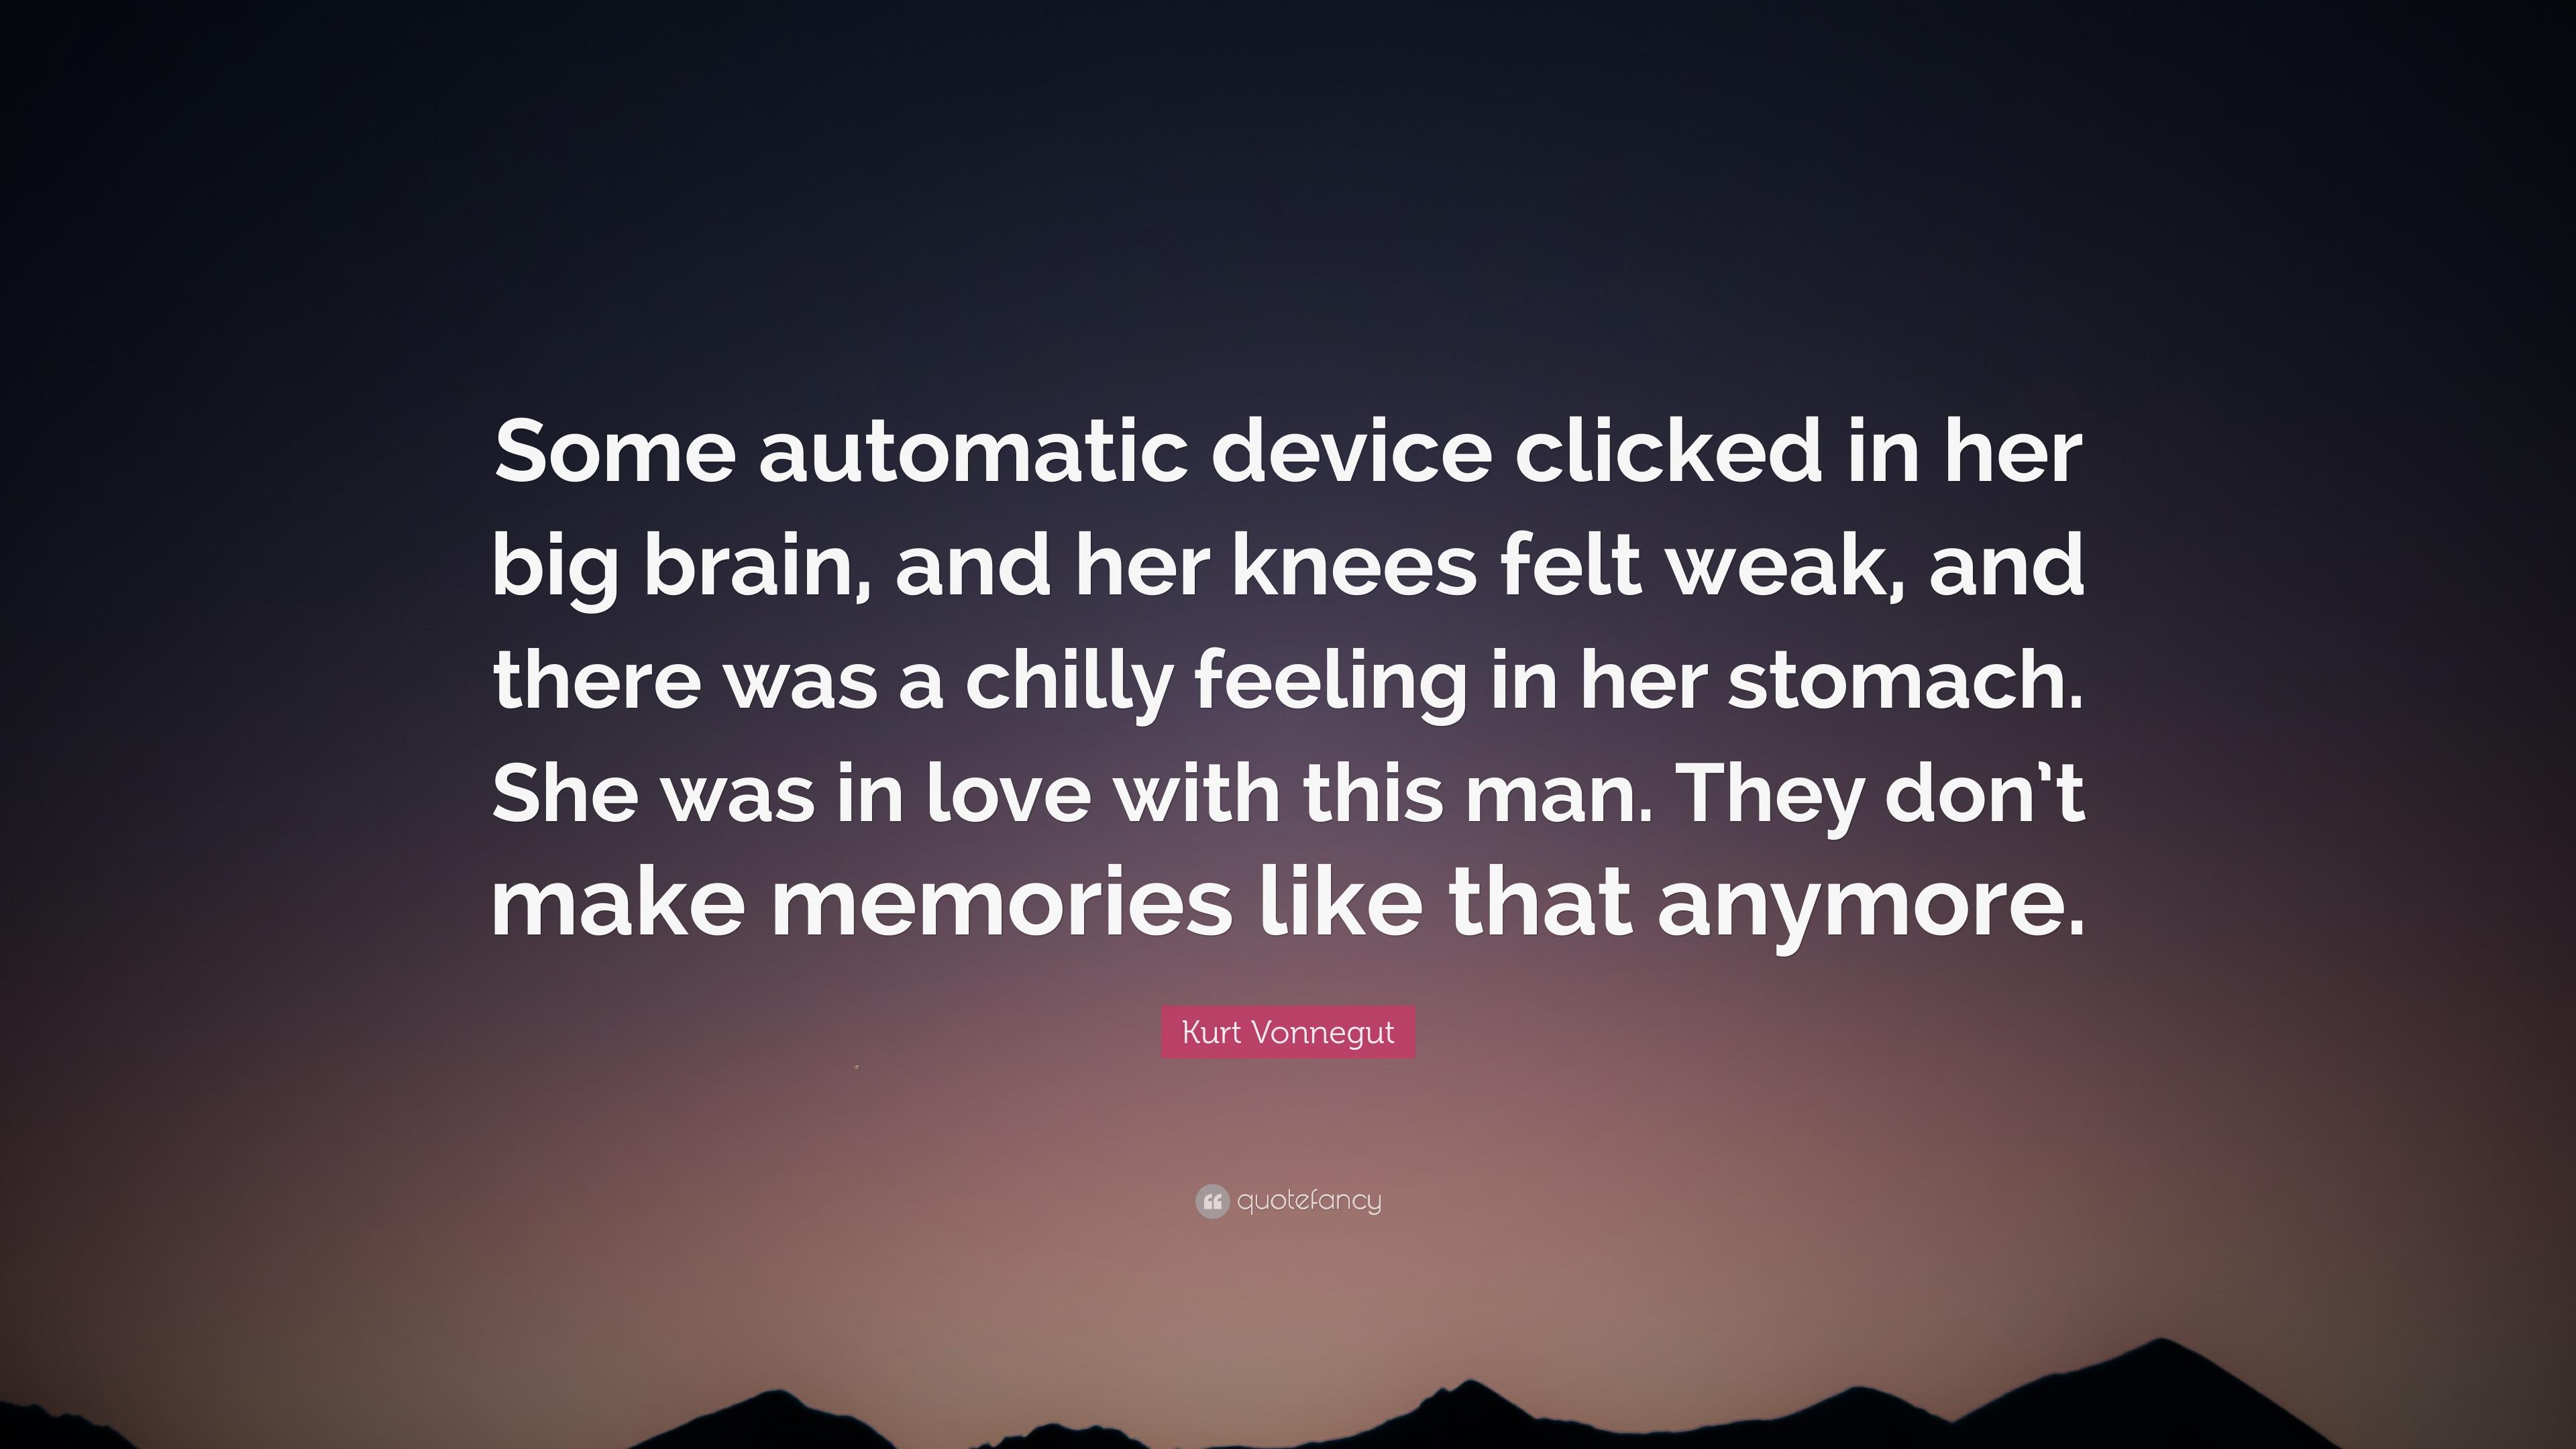 Kurt Vonnegut Quote: “Some automatic device clicked in her